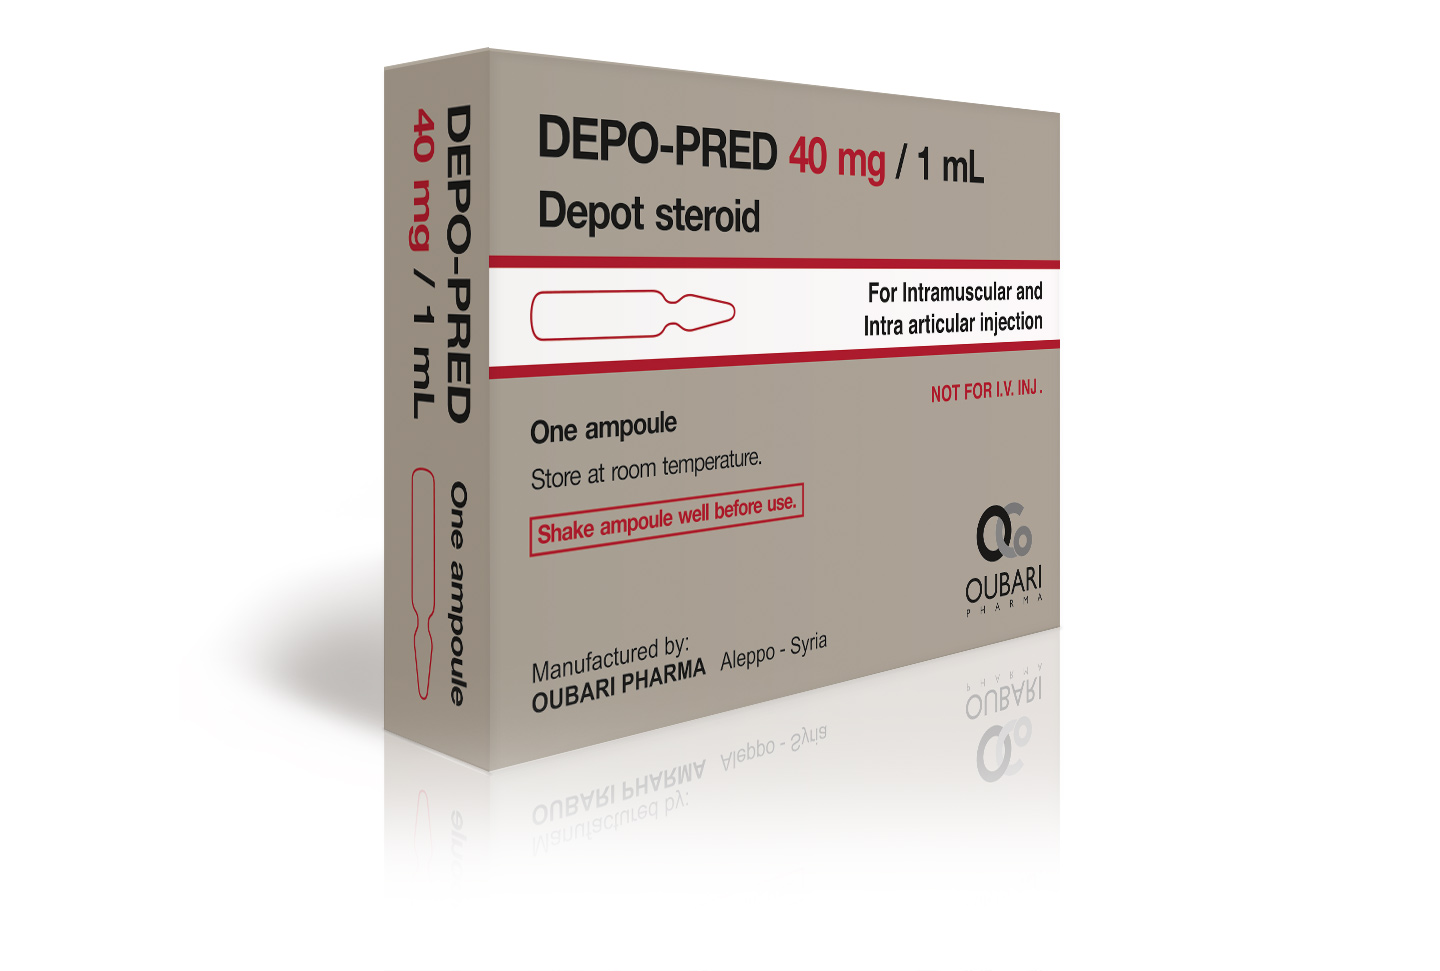 Methylprednisolone acetate 40 mg ampoules